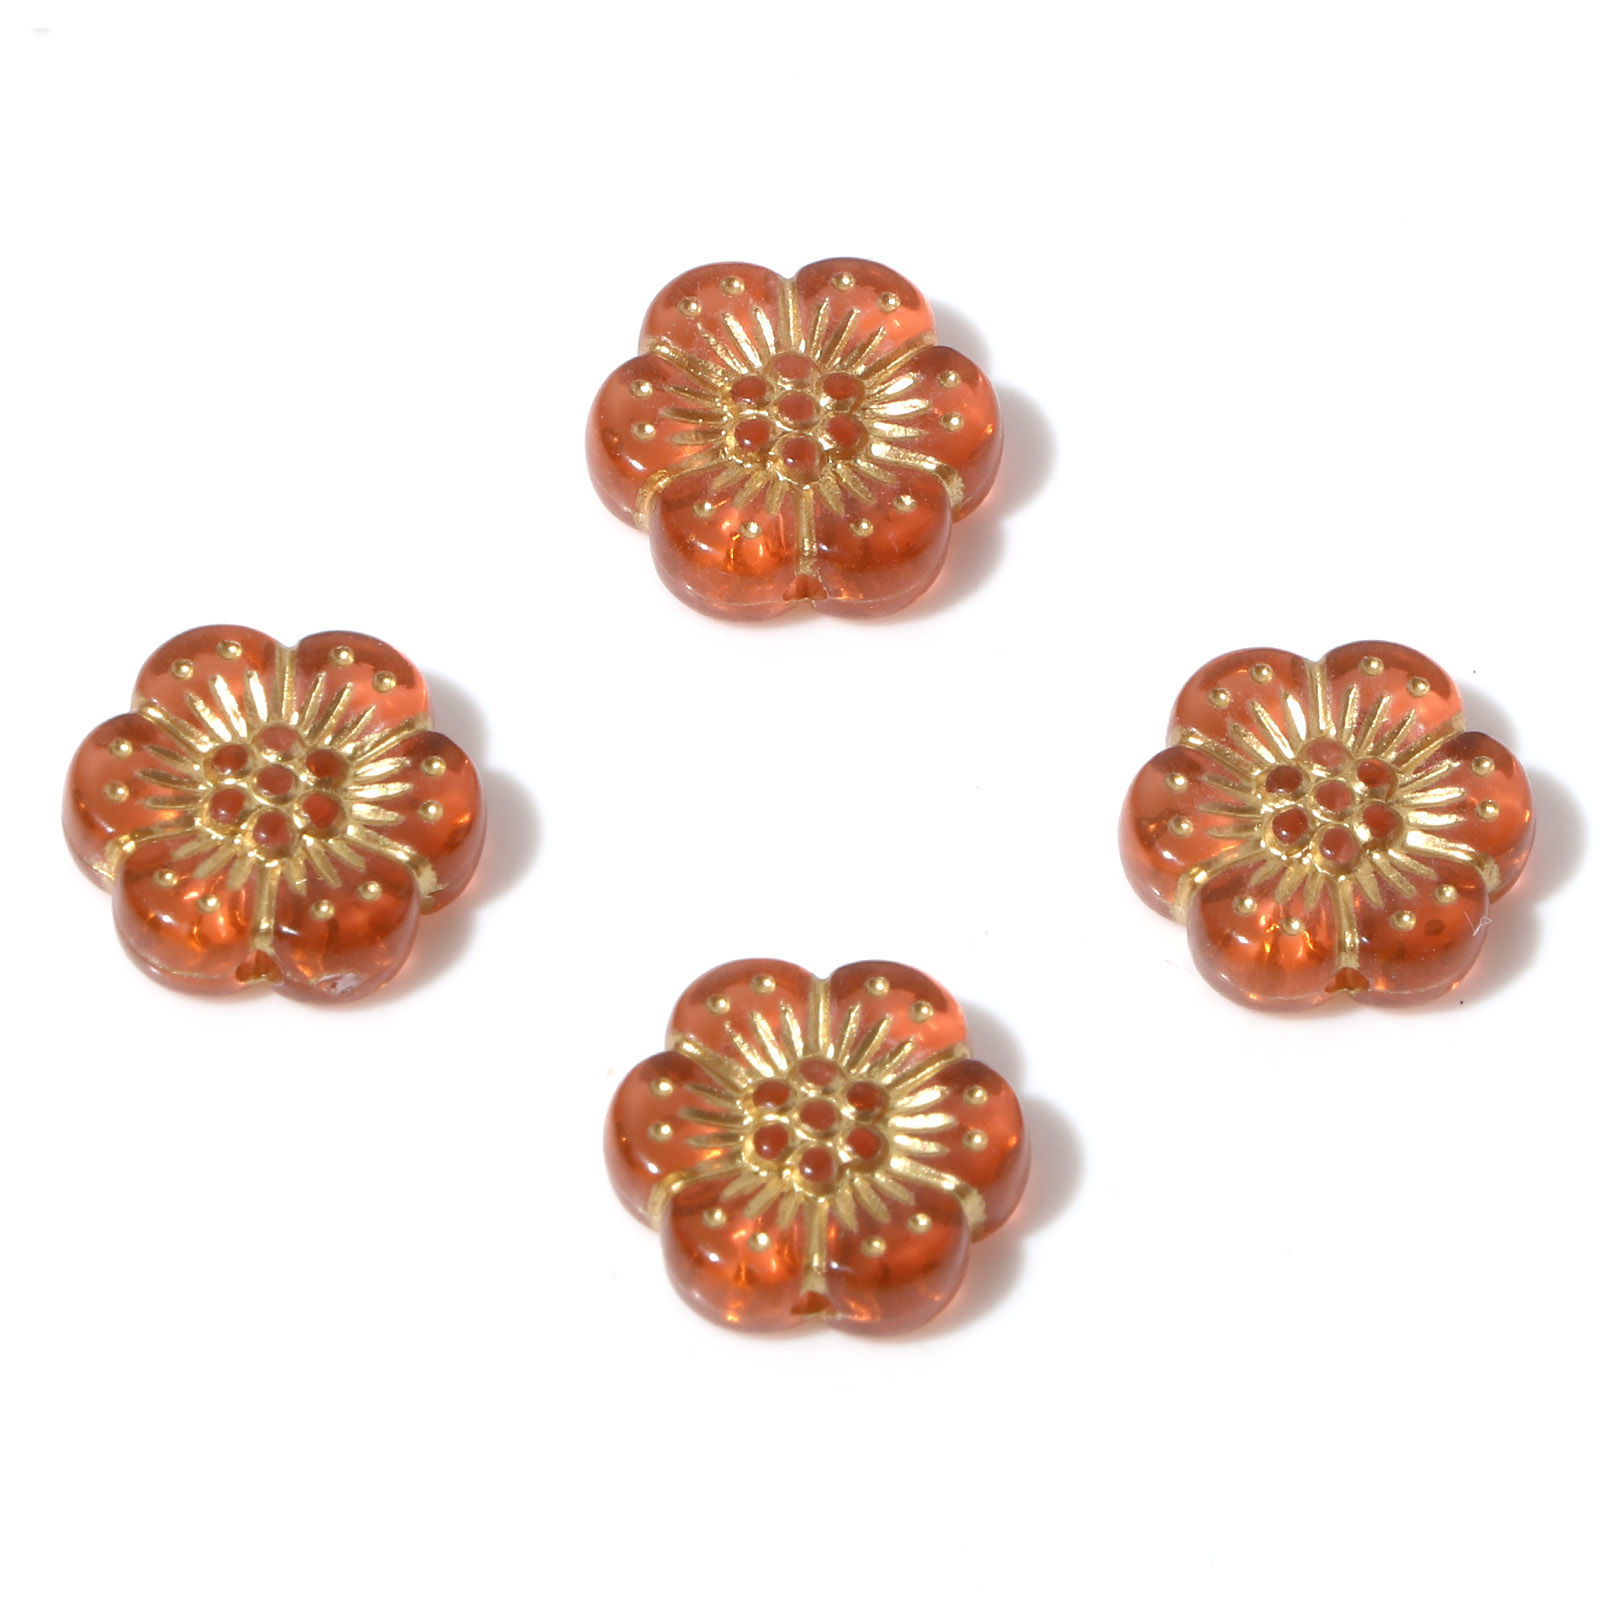 Picture of Acrylic Flora Collection Beads Light Salmon Flower About 13mm x 12mm, Hole: Approx 1.2mm, 10 PCs